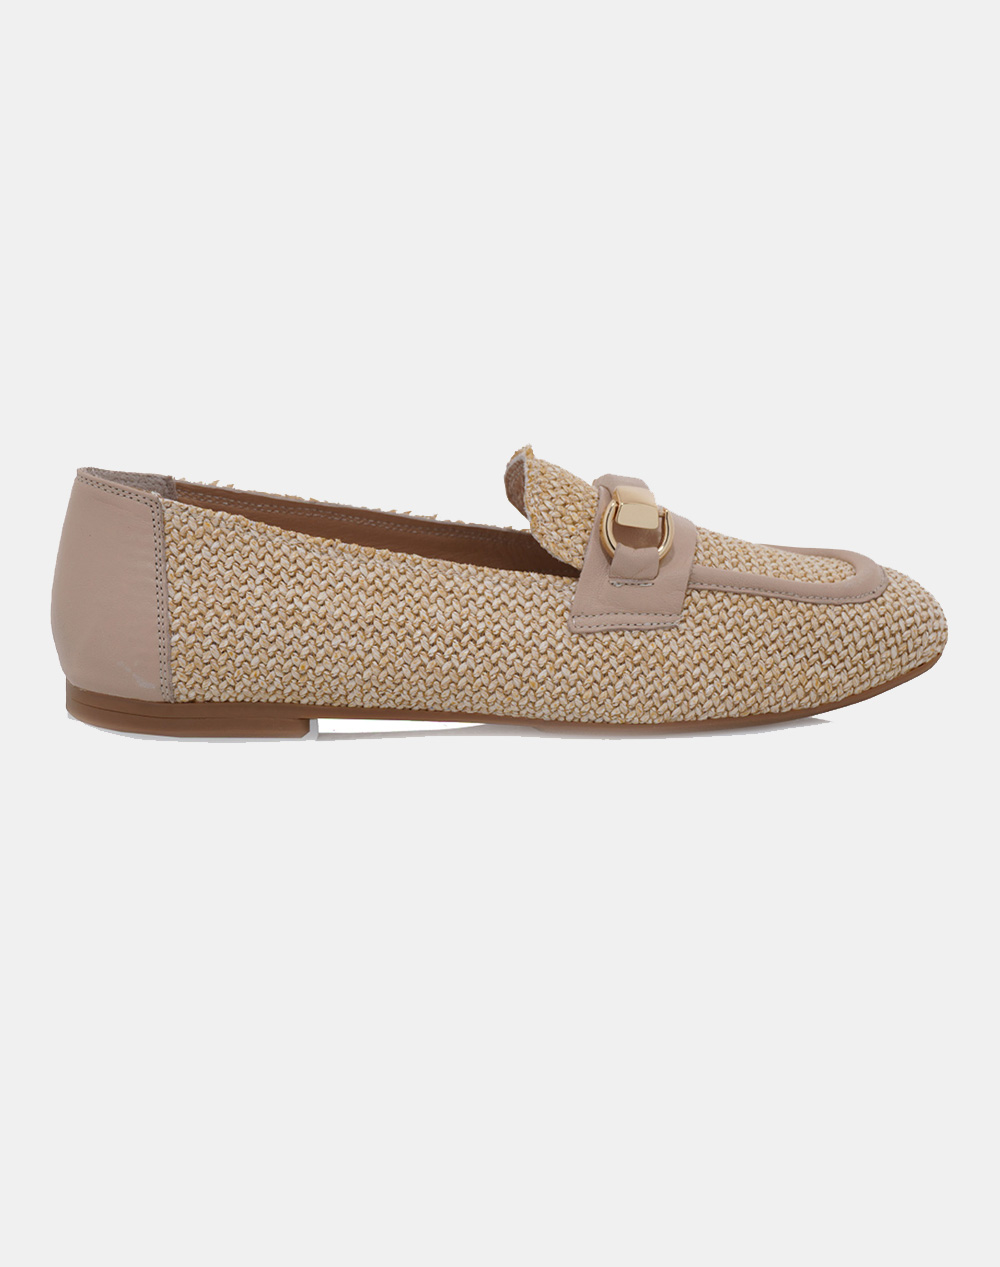 ALESSANDRA BRUNI LOAFERS